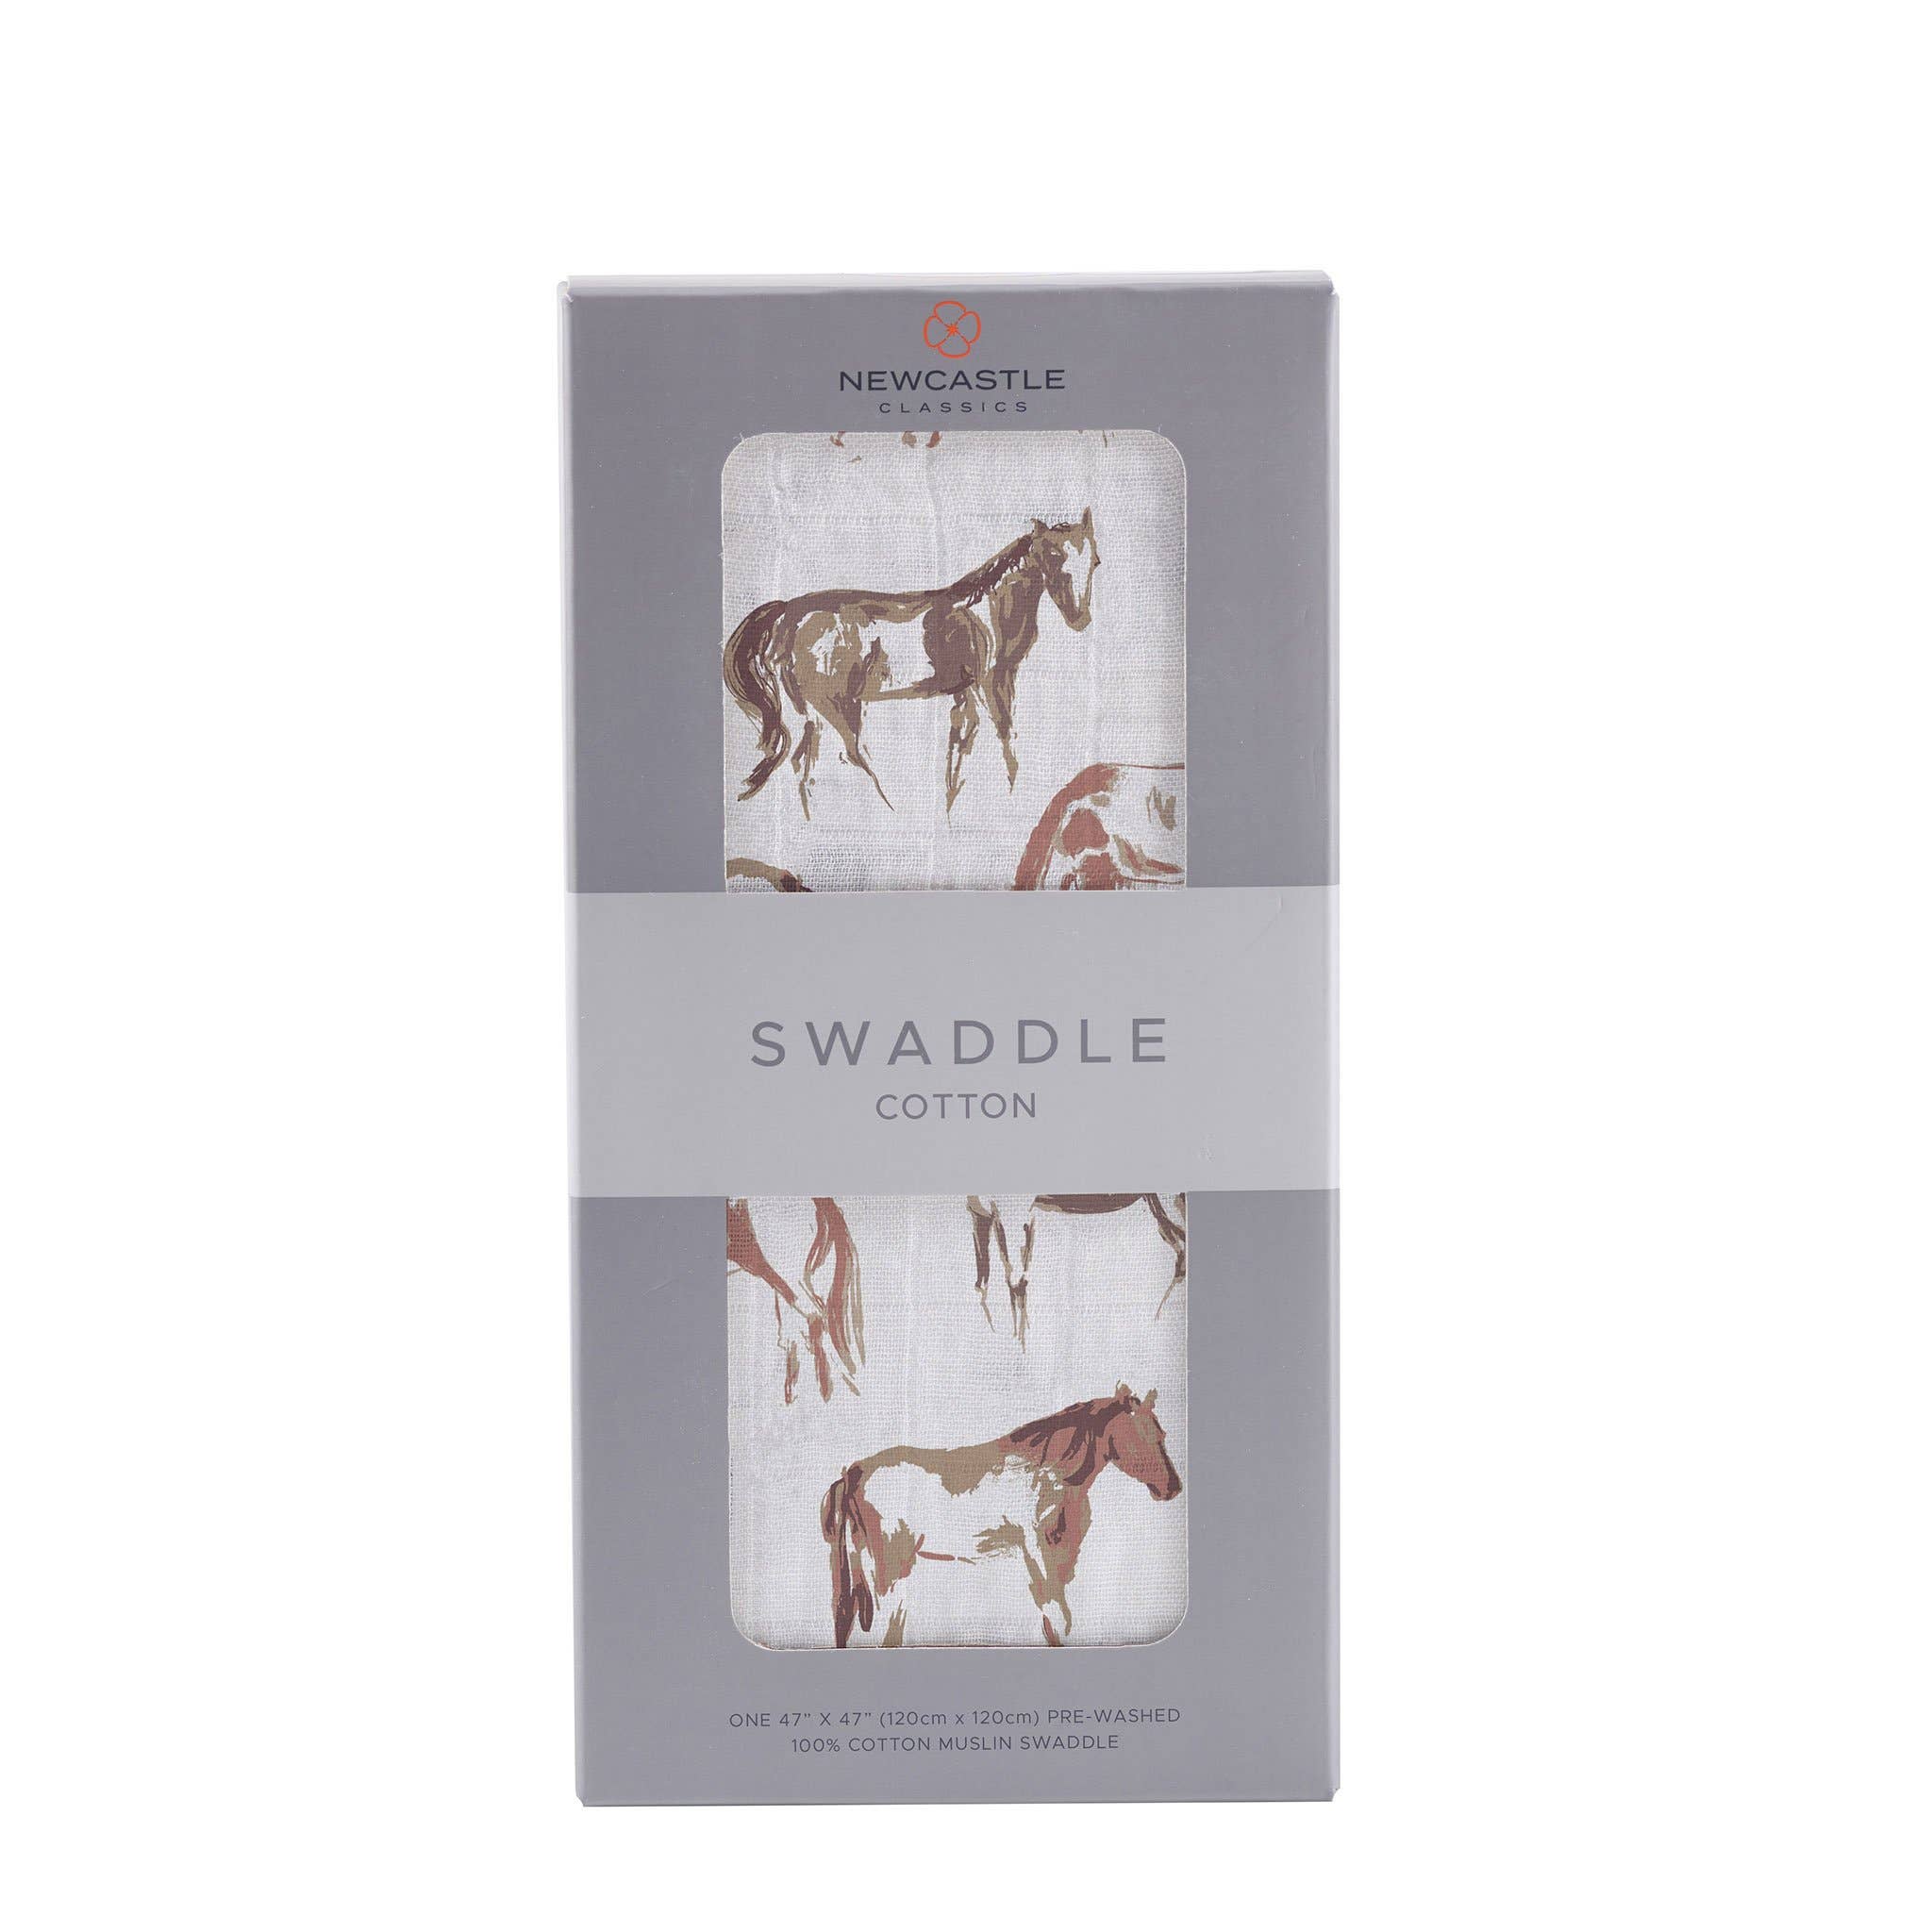 Cotton Swaddle. Multiple different horse graphics on white swaddle